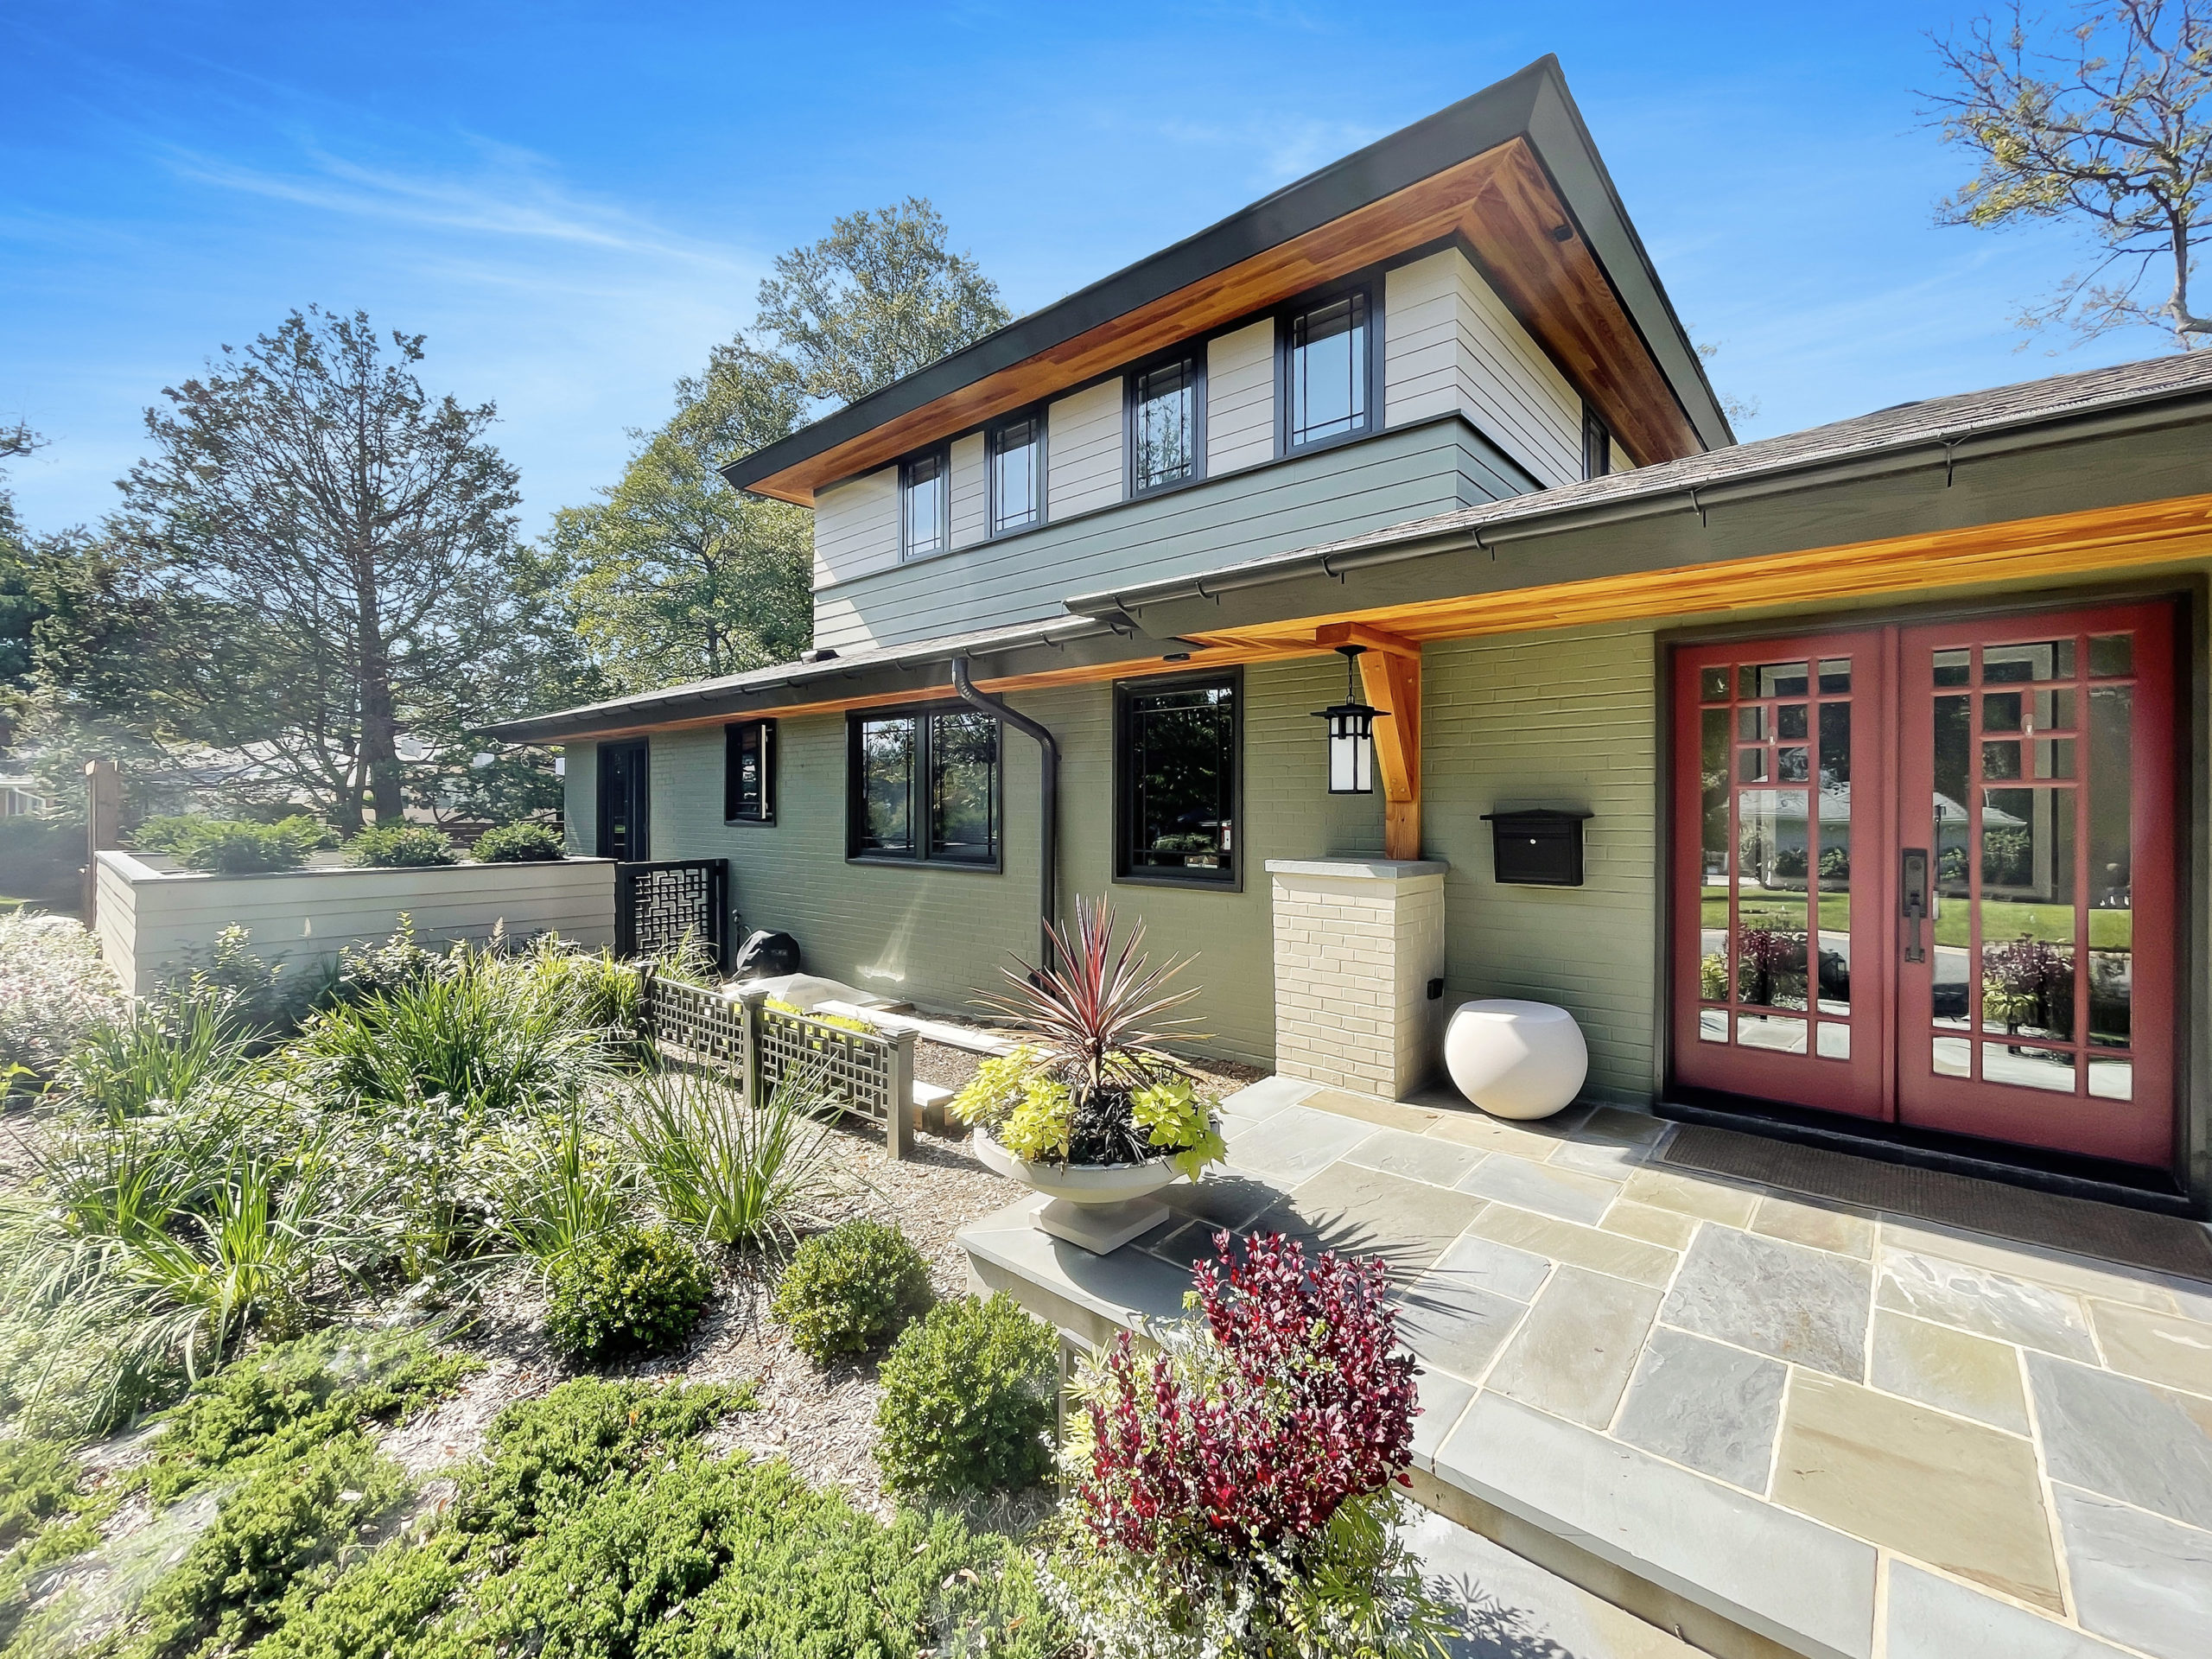 , 5 Reasons to Consider a Second-Story Addition